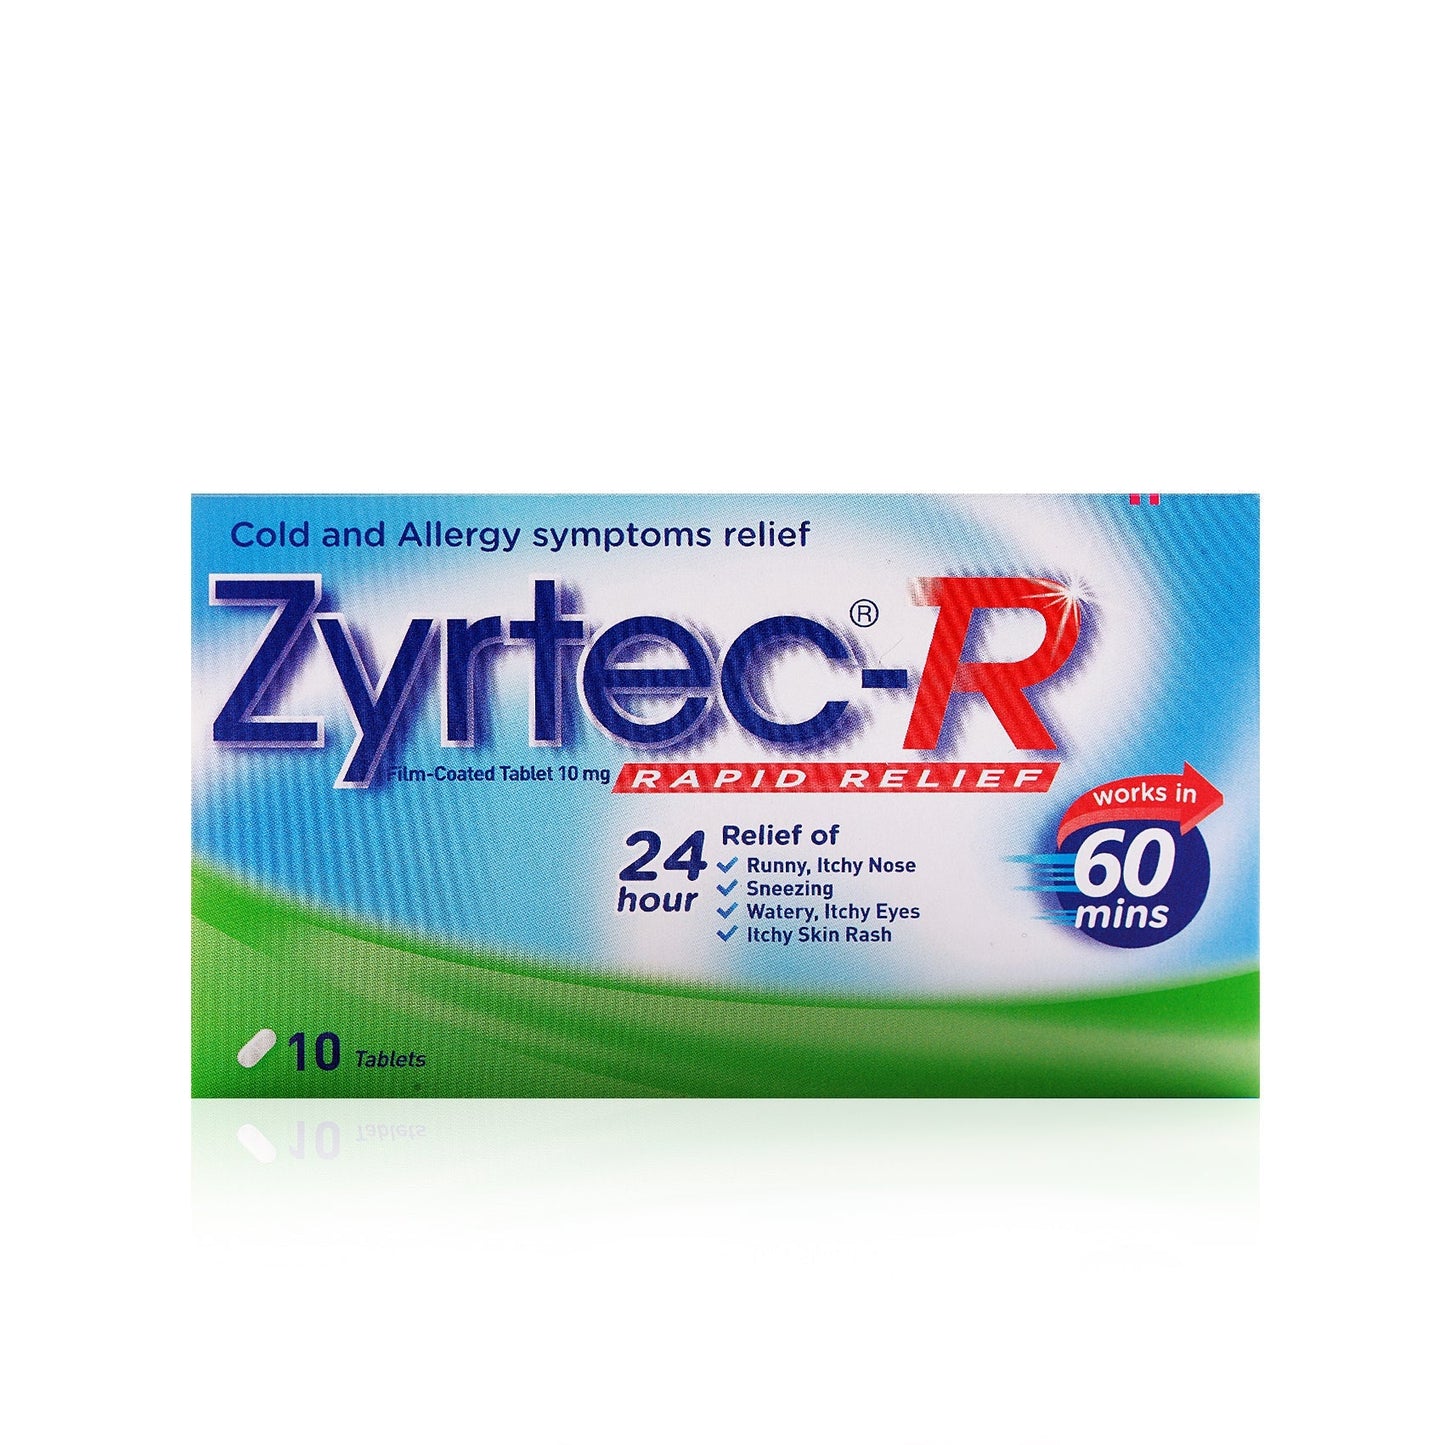 Zyrtec-R Tablets 10mg 10's